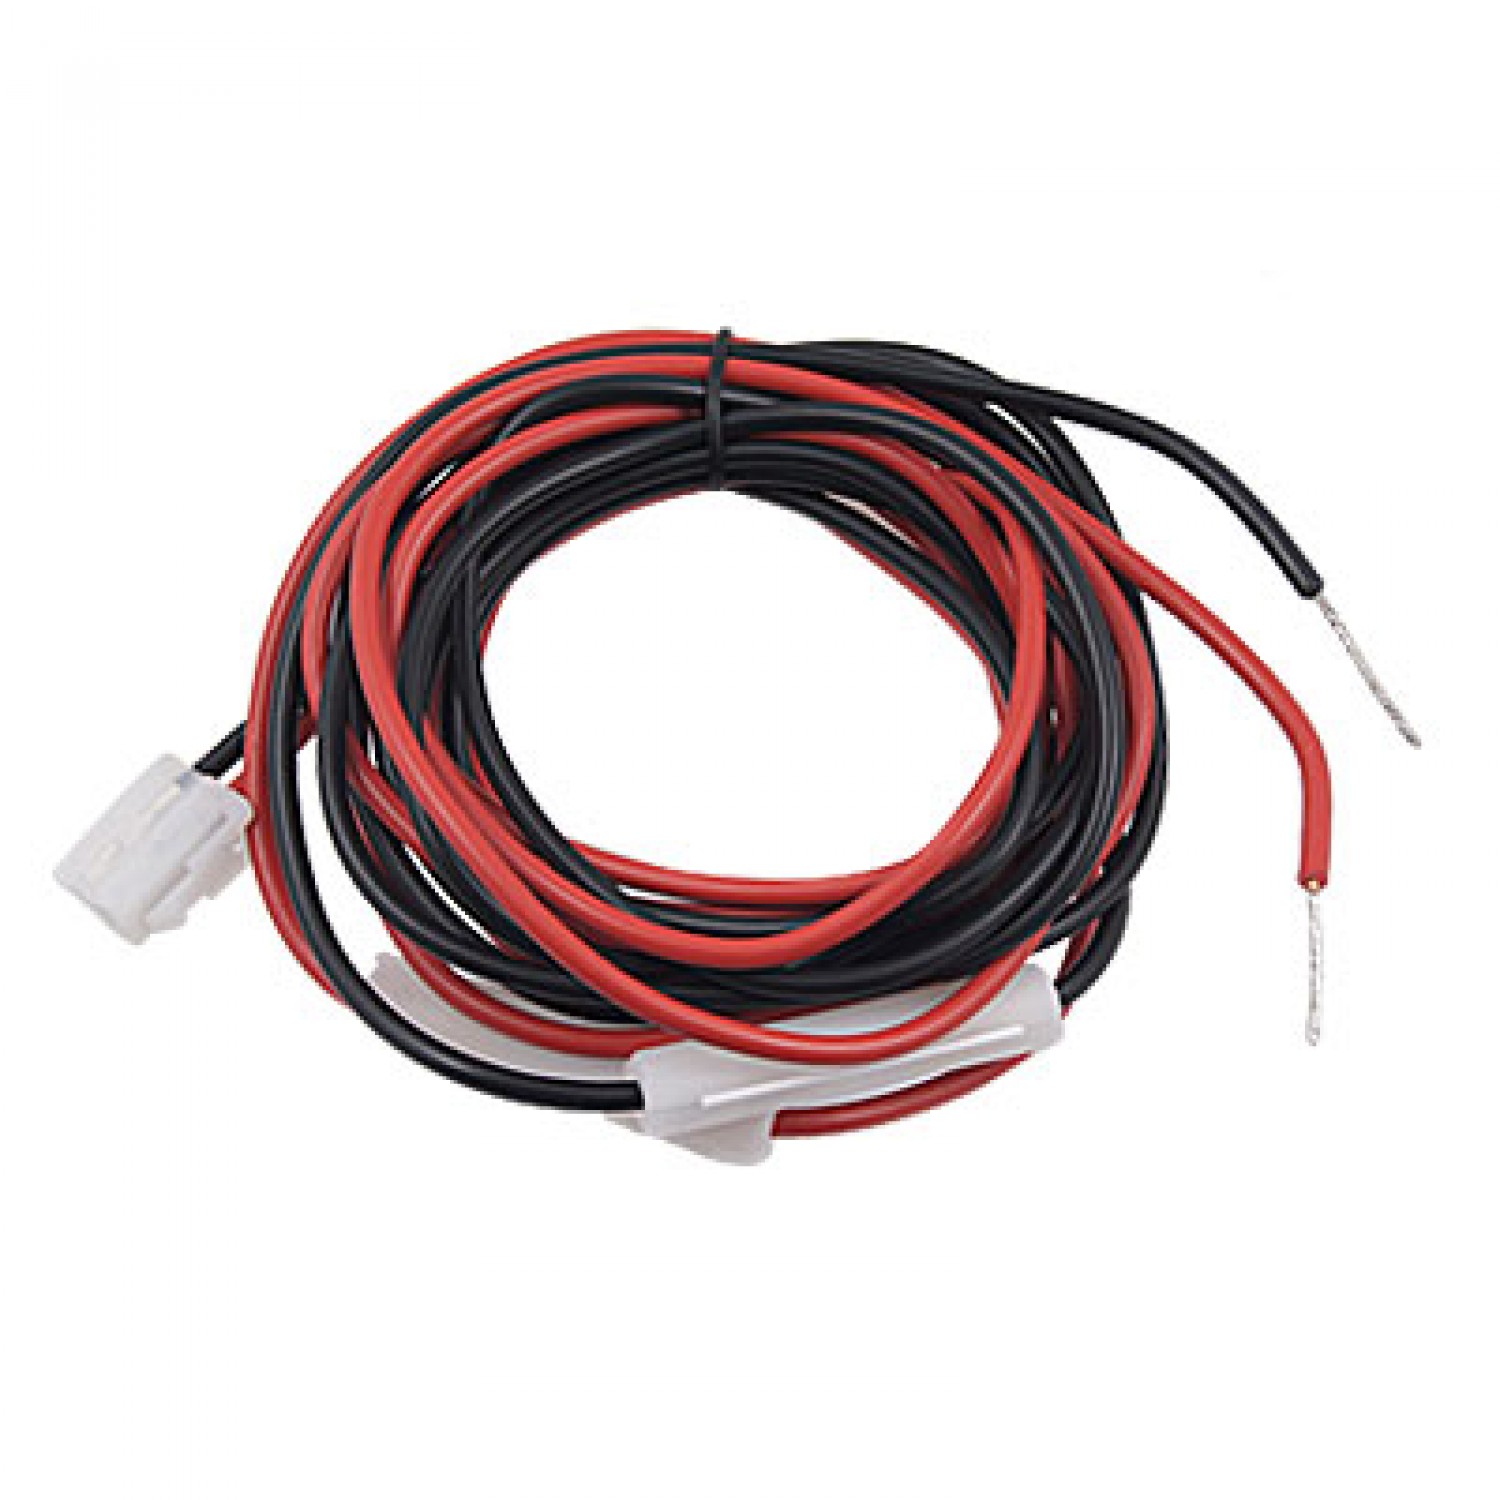 9.8ft Black Red Power Cable for Yaesu FT-7800R FT-8900R | ShopTV